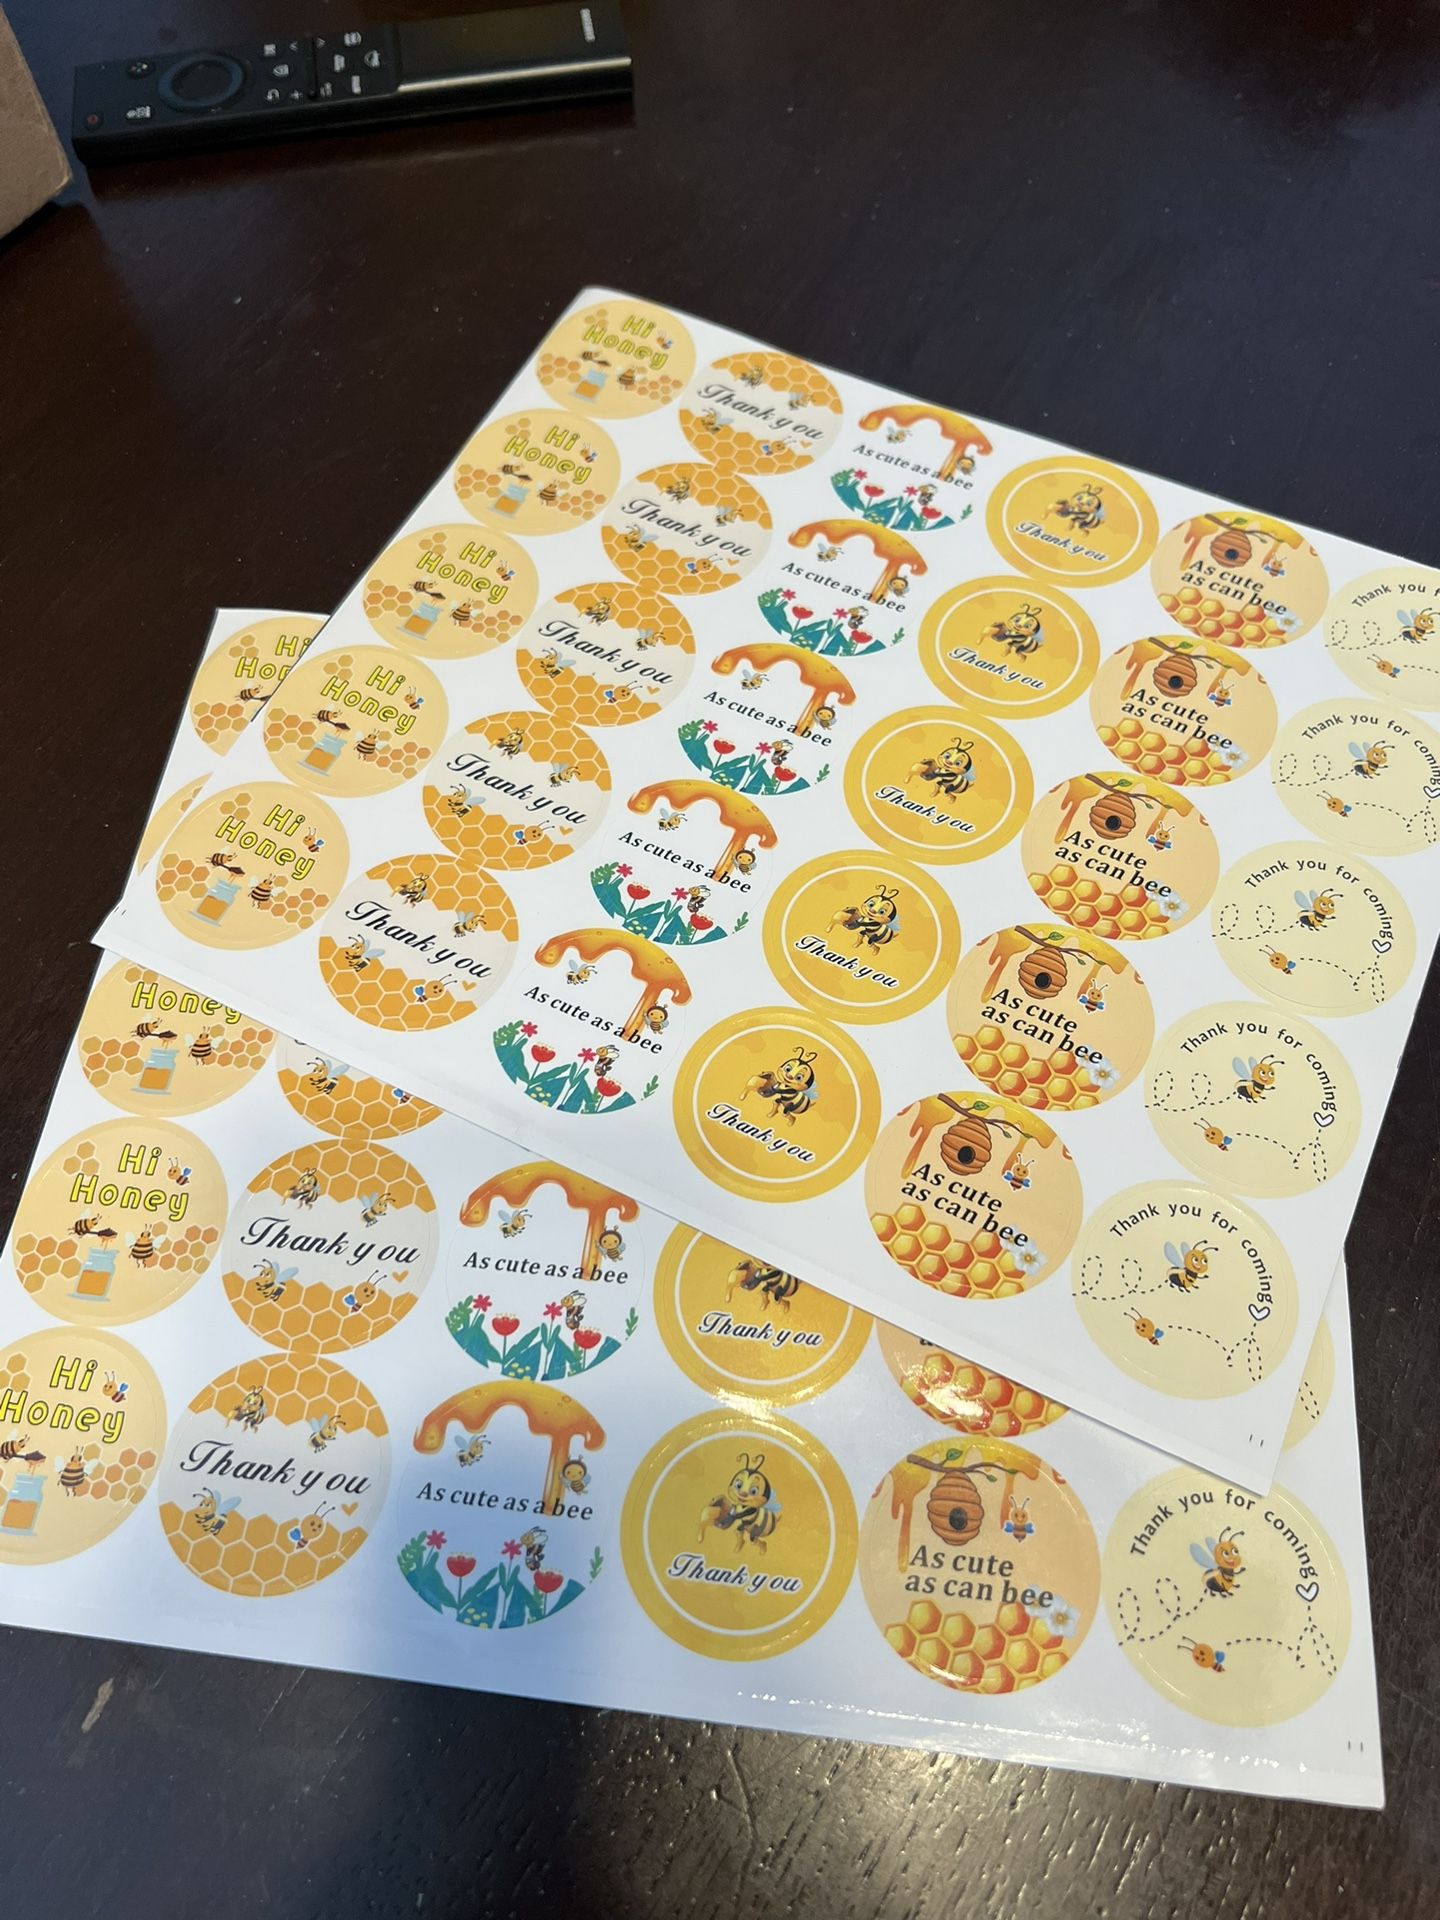 Bee Stickers 